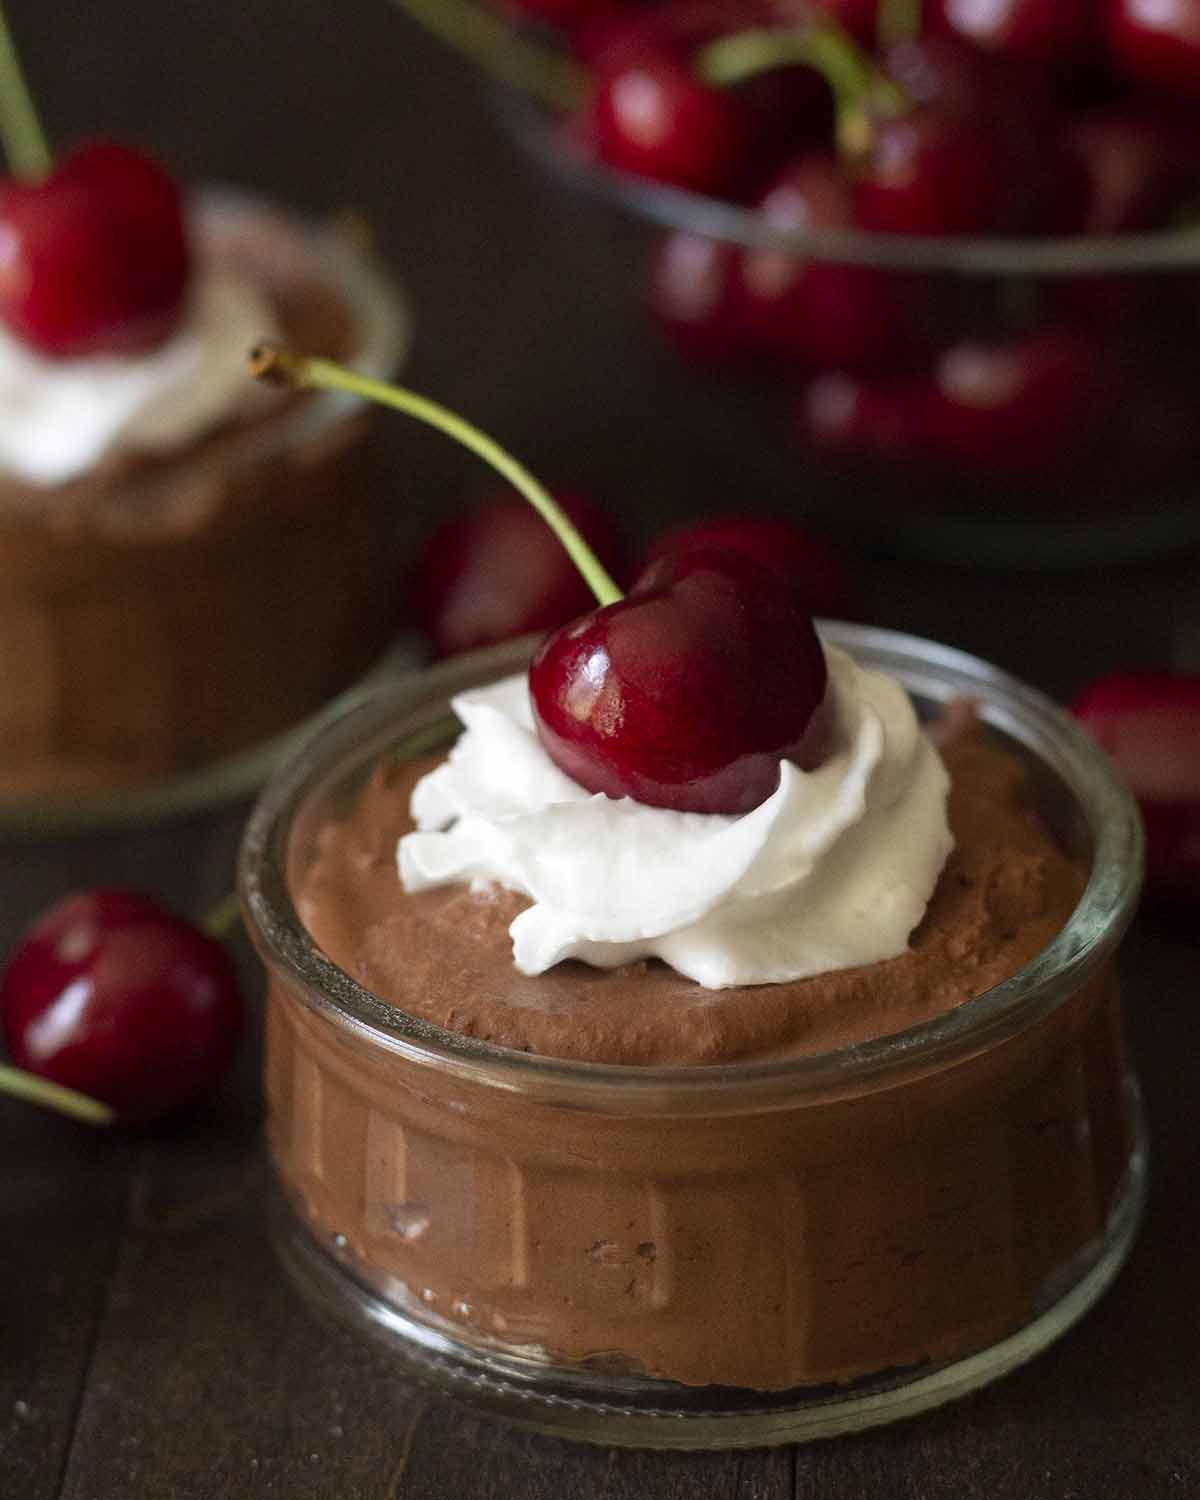 A vegan chocolate dessert in a glass bowl topped with dairy-free whipped cream and a fresh cherry.